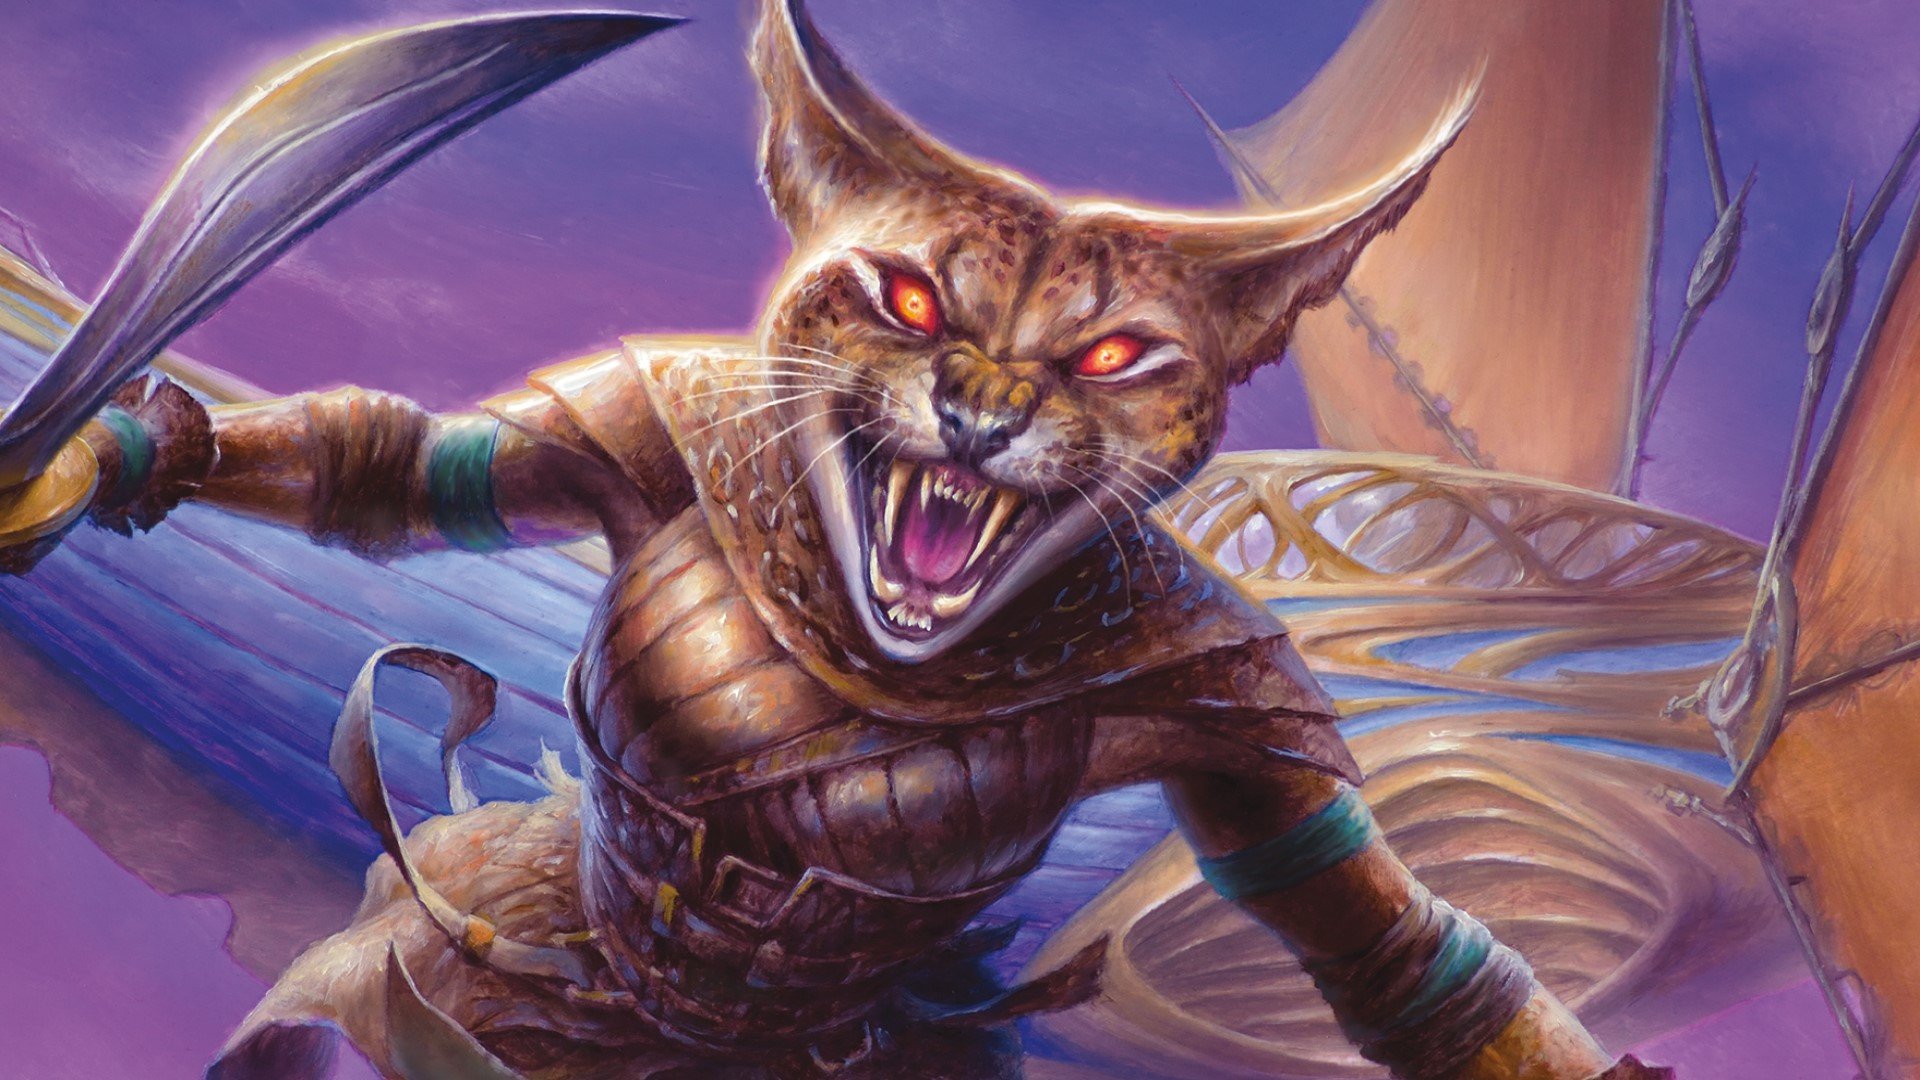 DnD Tabaxi 5e race guide – names, traits, and class ideas